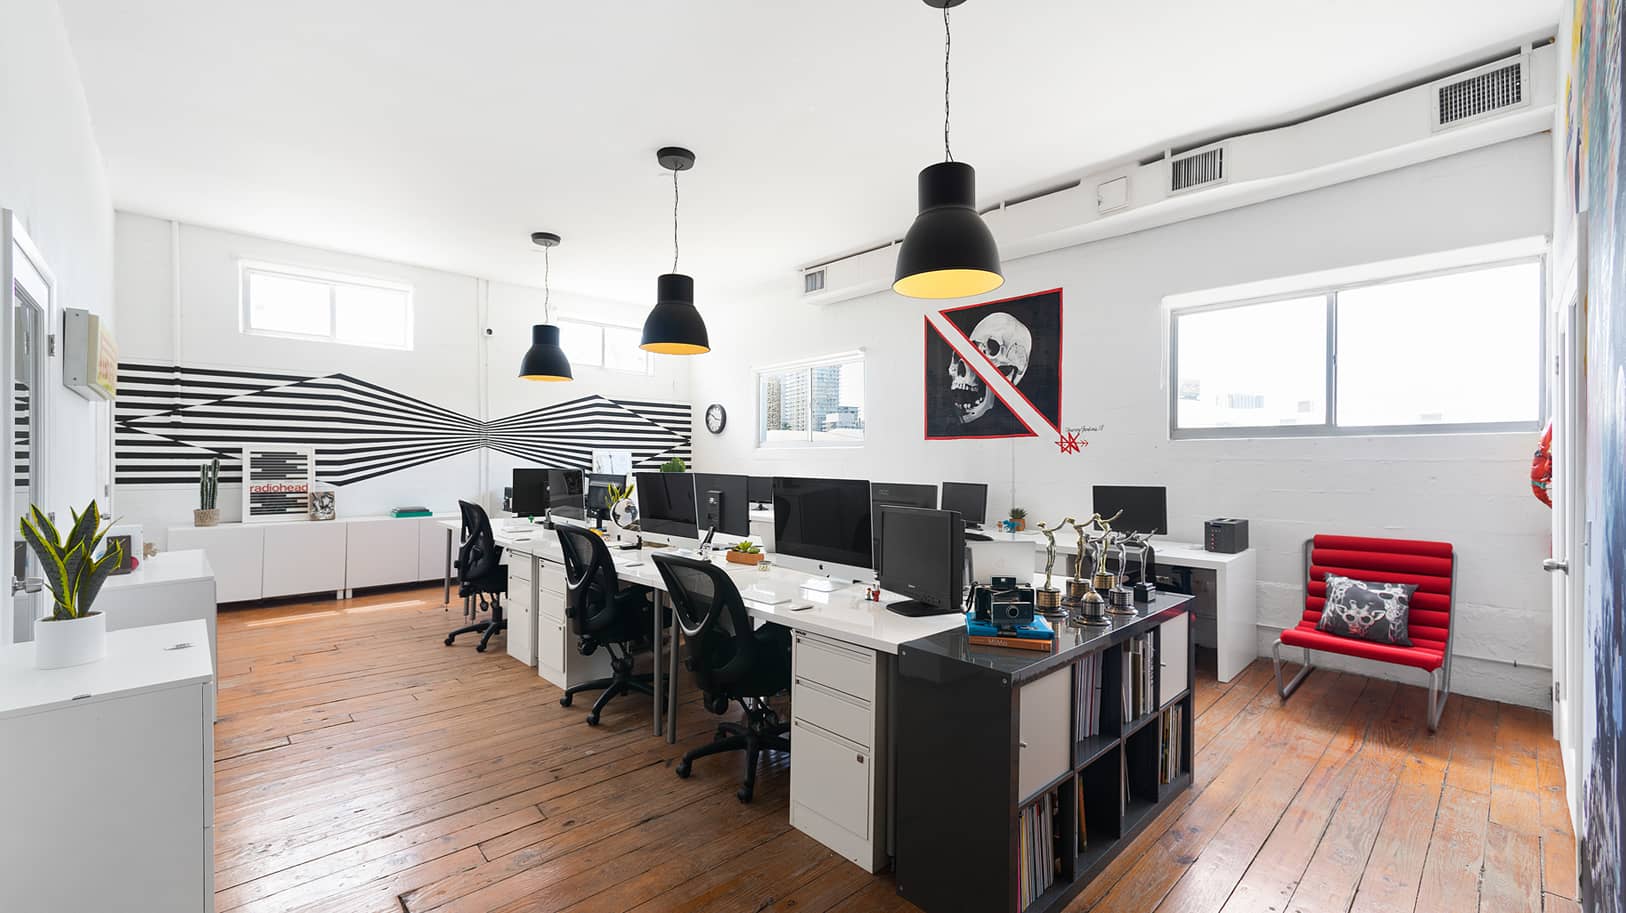 Wide angle view of workstations area at artistic-looking studio office | Think Twice studio